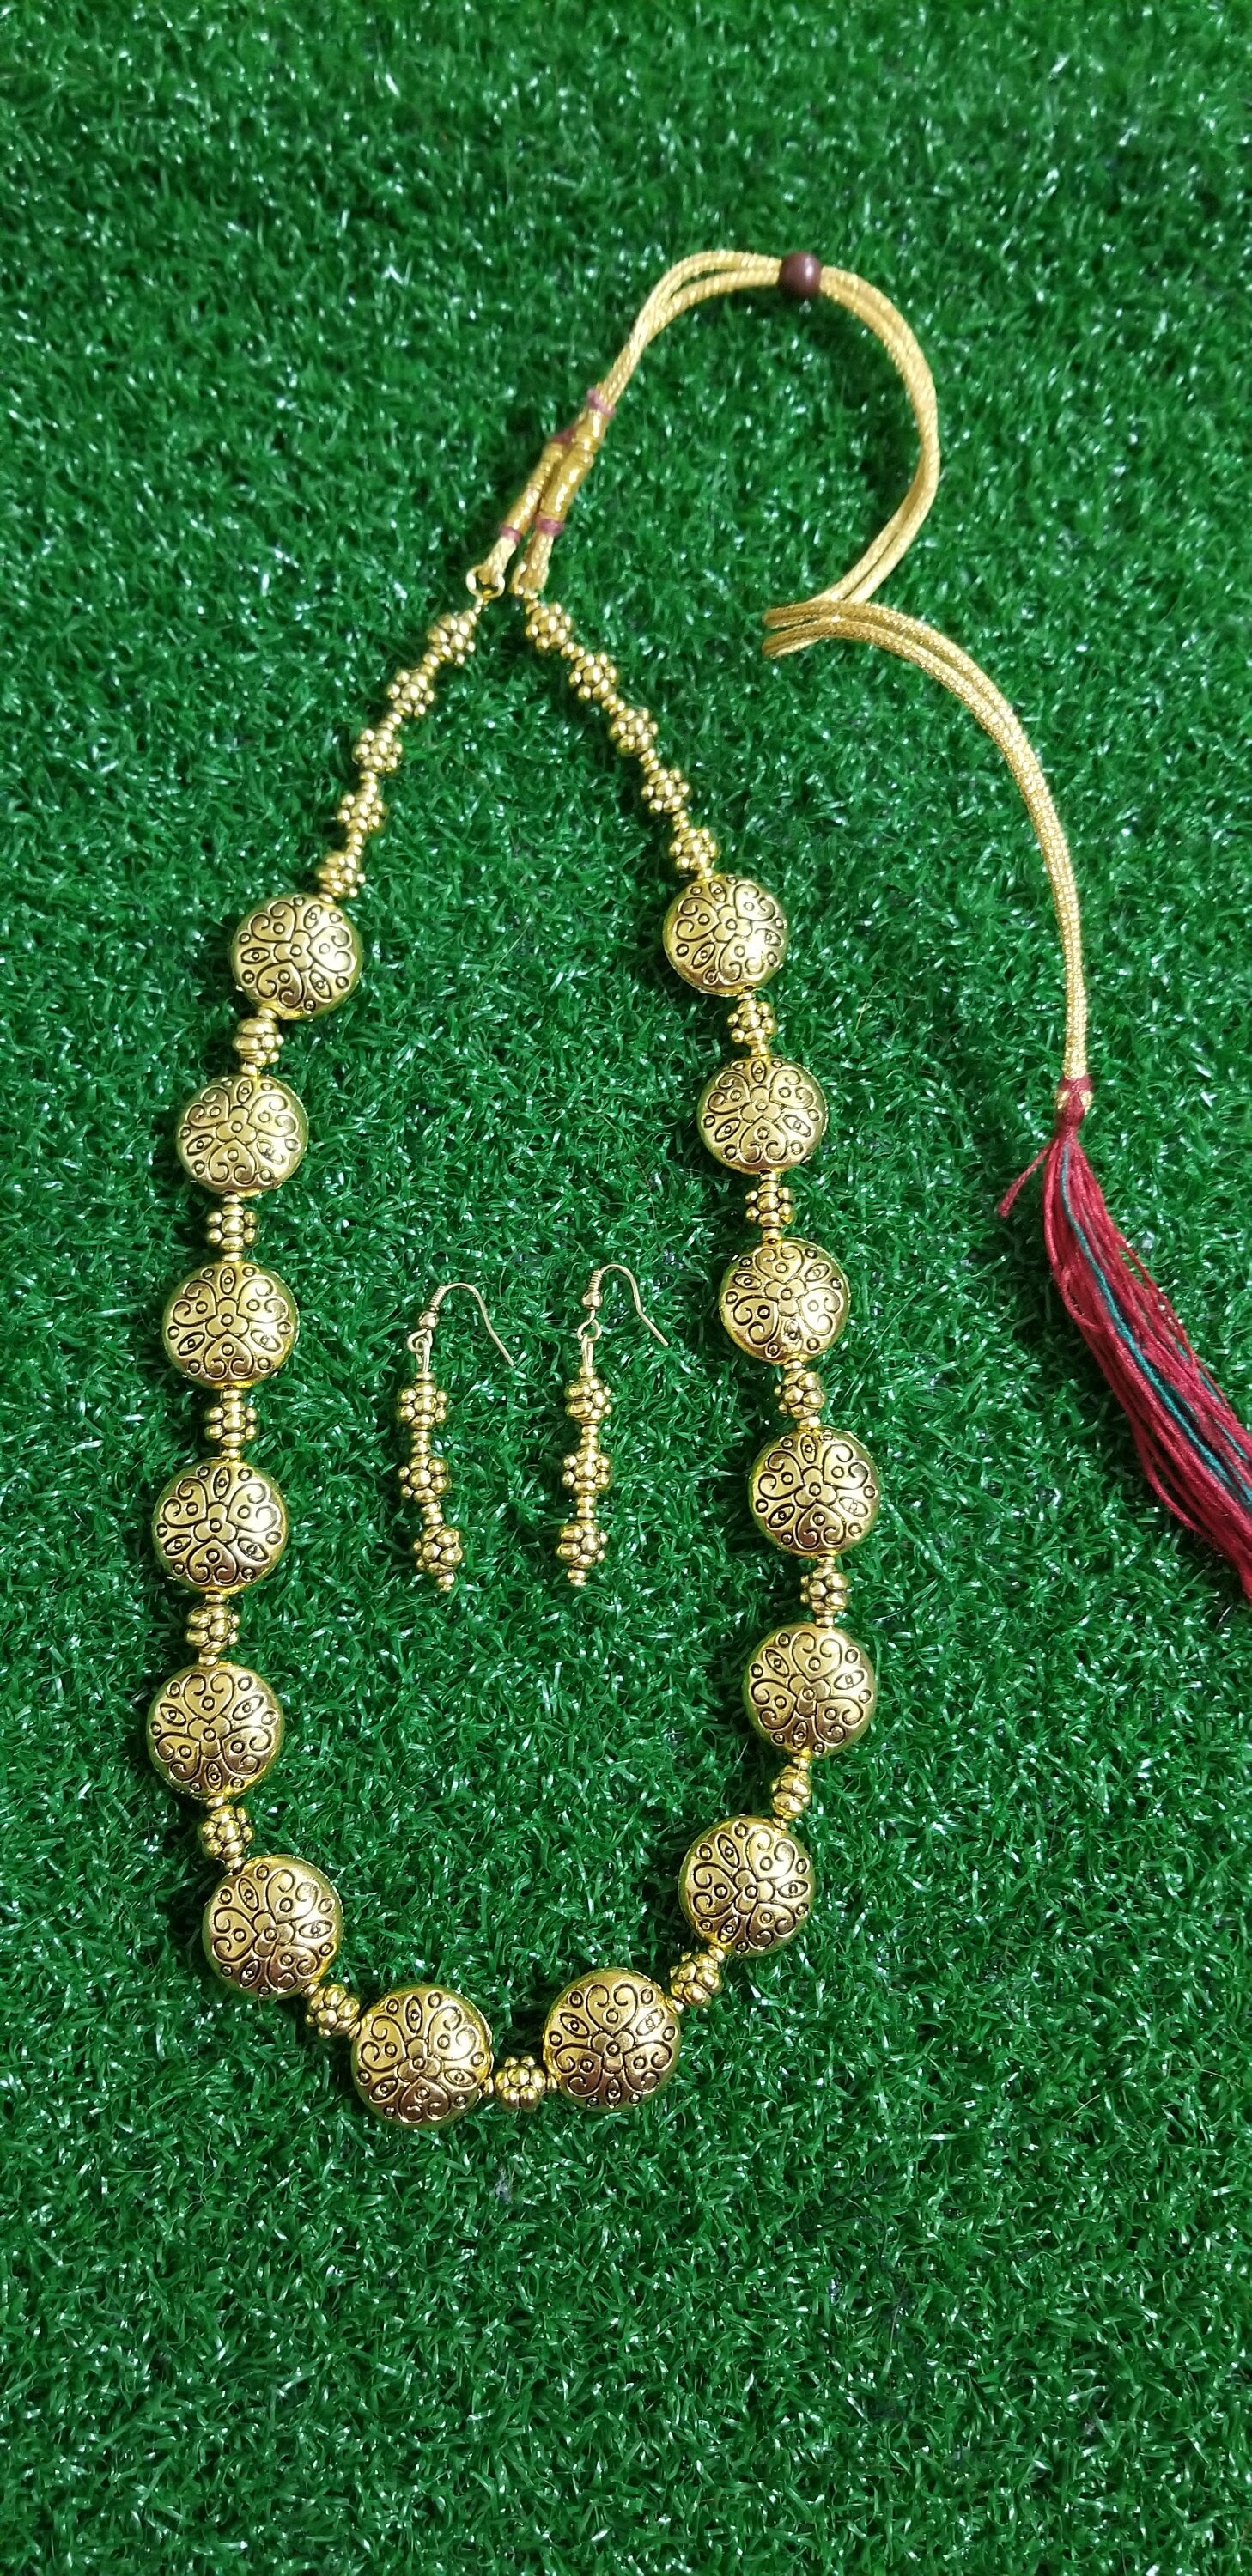 Antique bead chain with Earrings